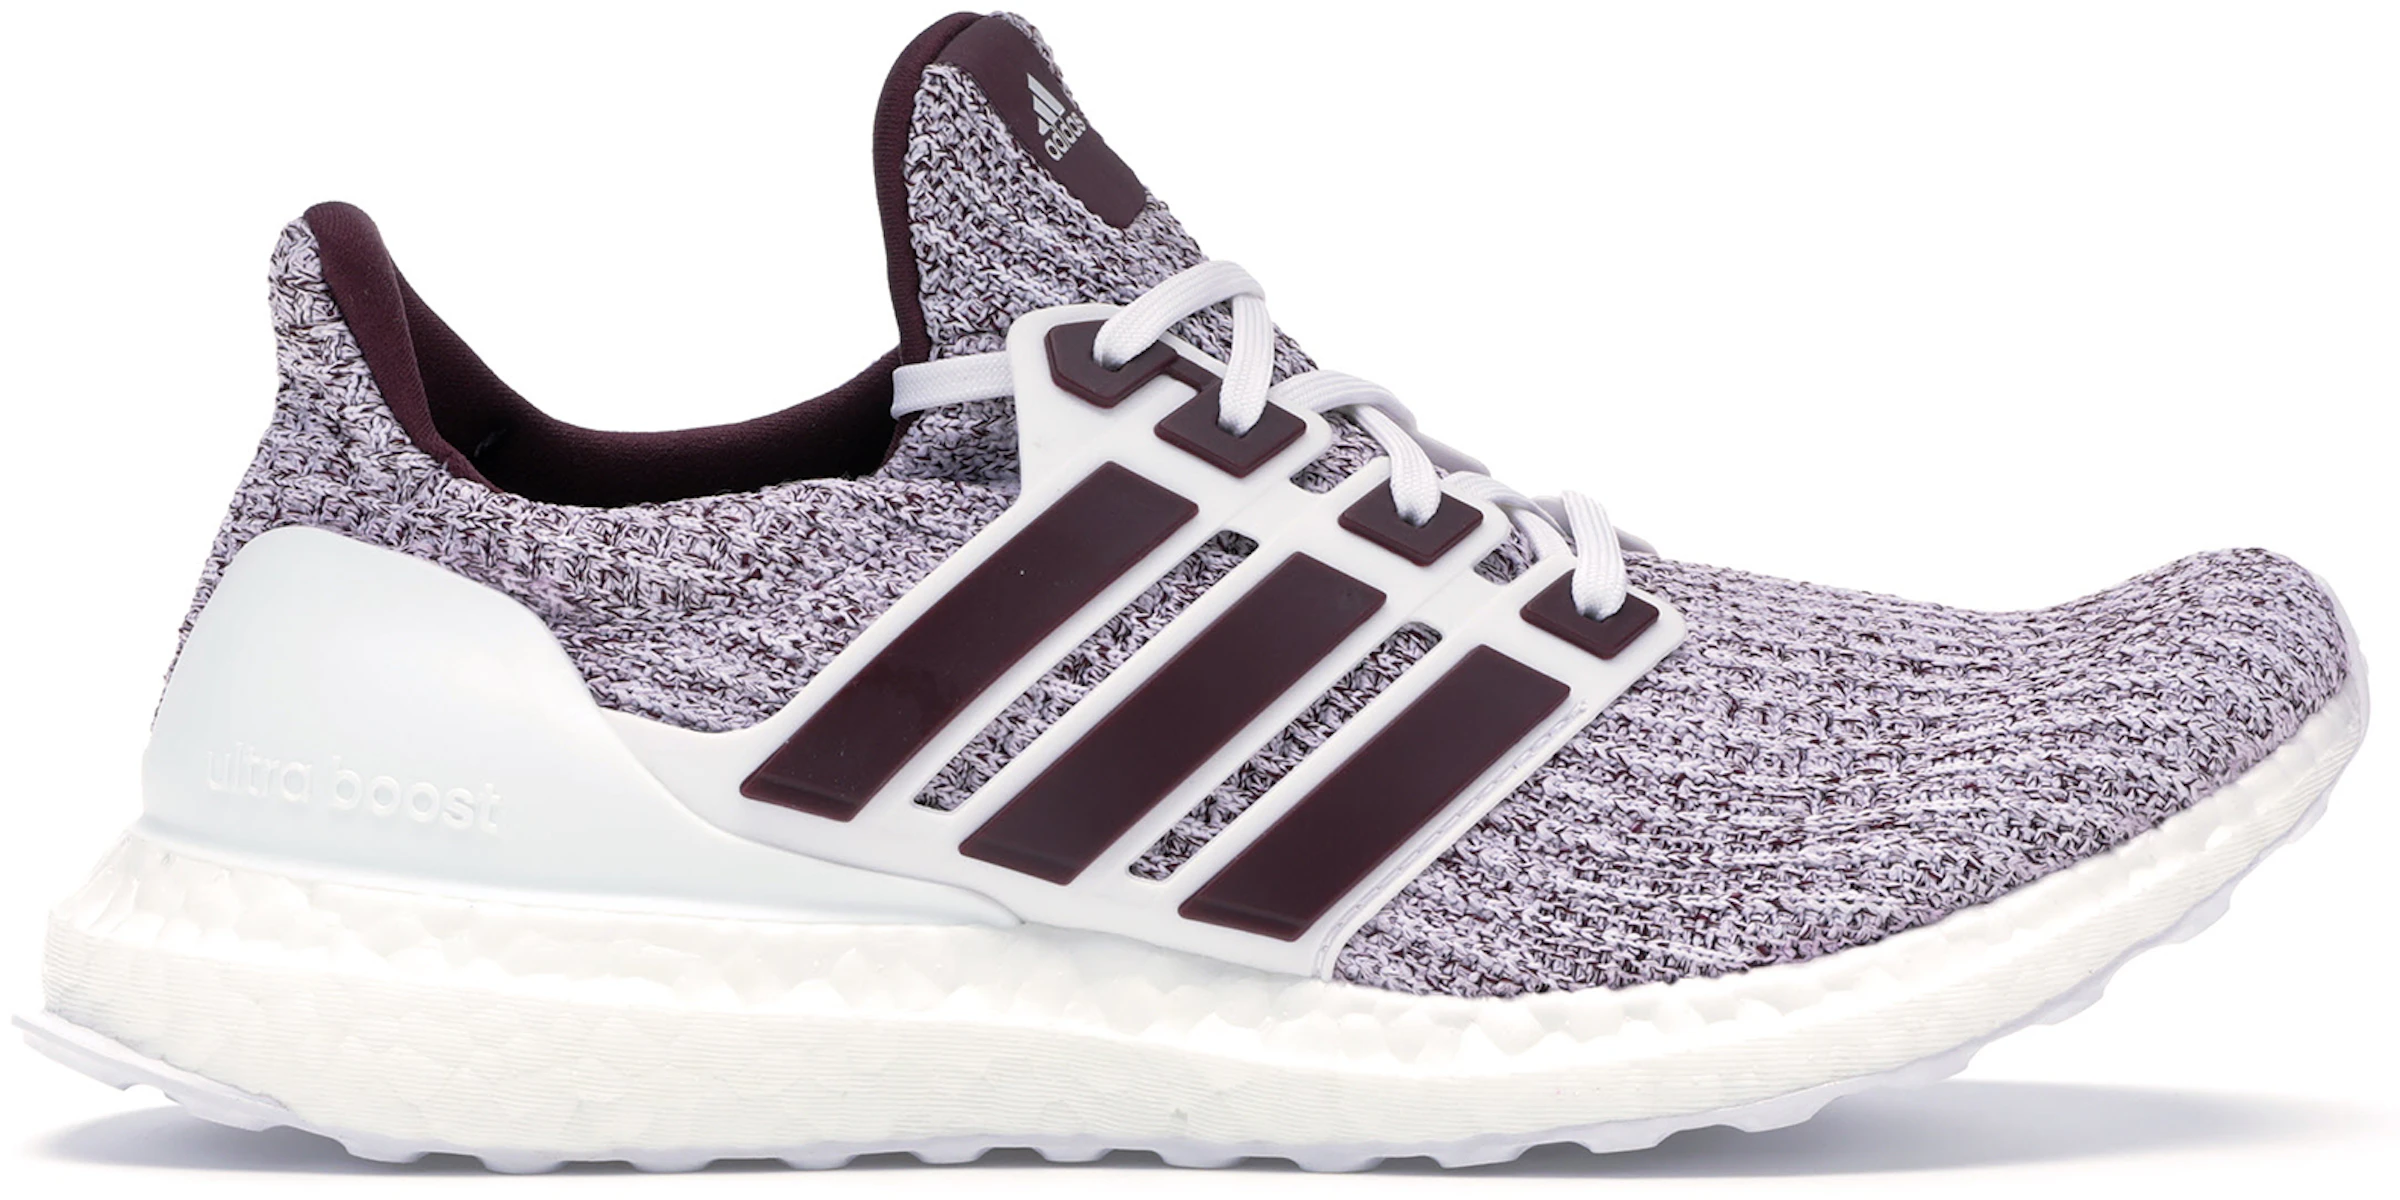 adidas Ultra Boost 4.0 Cloud White - EE3705 - US